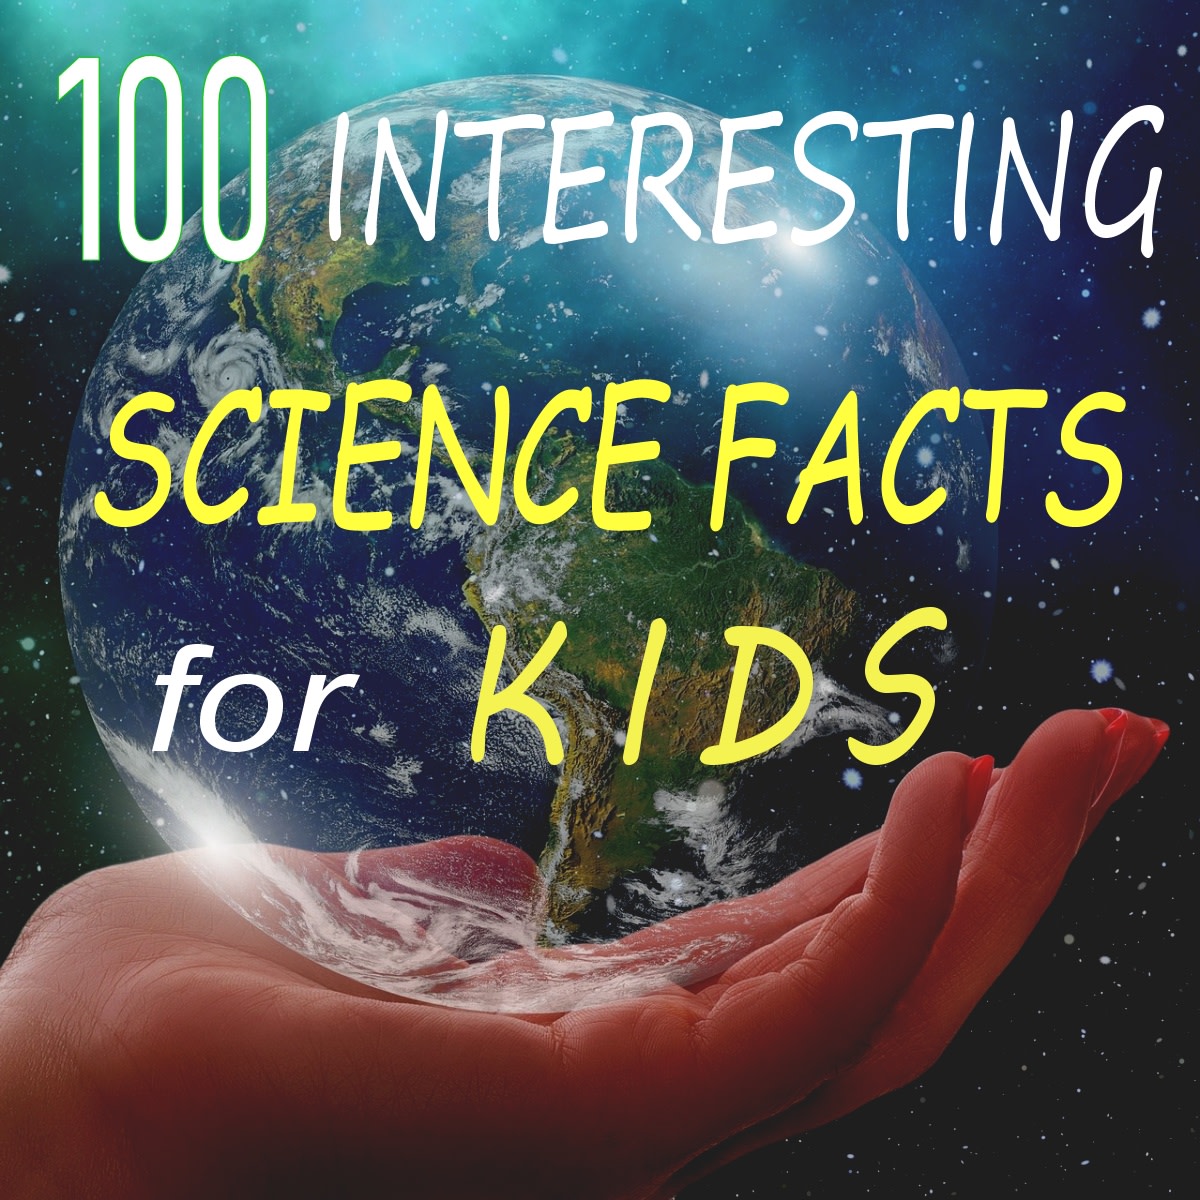 Read on for 100 facts about science that are kid-friendly!